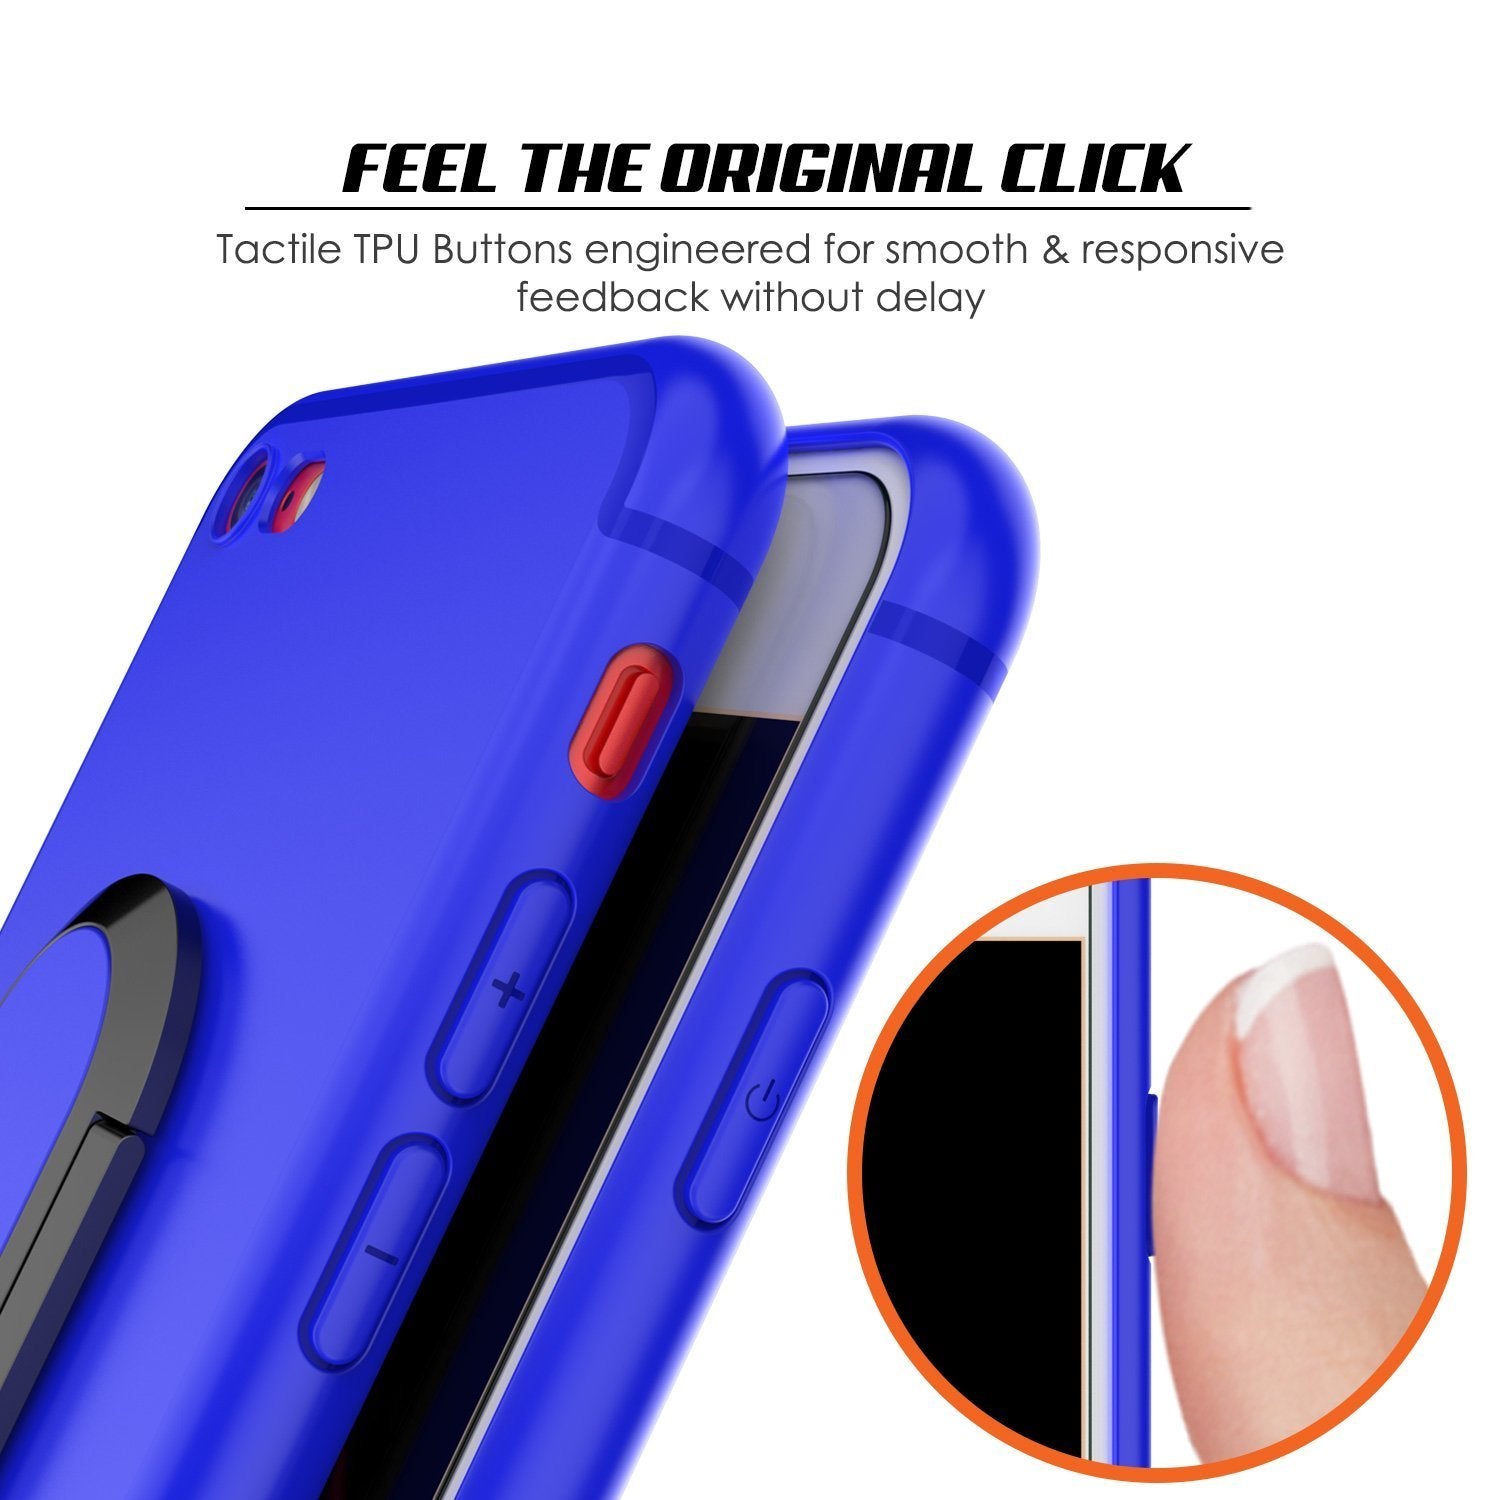 iPhone 8 Case, Punkcase Magnetix Protective TPU Cover W/ Kickstand, Ring Grip Holder & Metal Plate for Magnetic Car Phone Mount PLUS Tempered Glass Screen Protector for Apple iPhone 6 /7 & 8 [Blue]